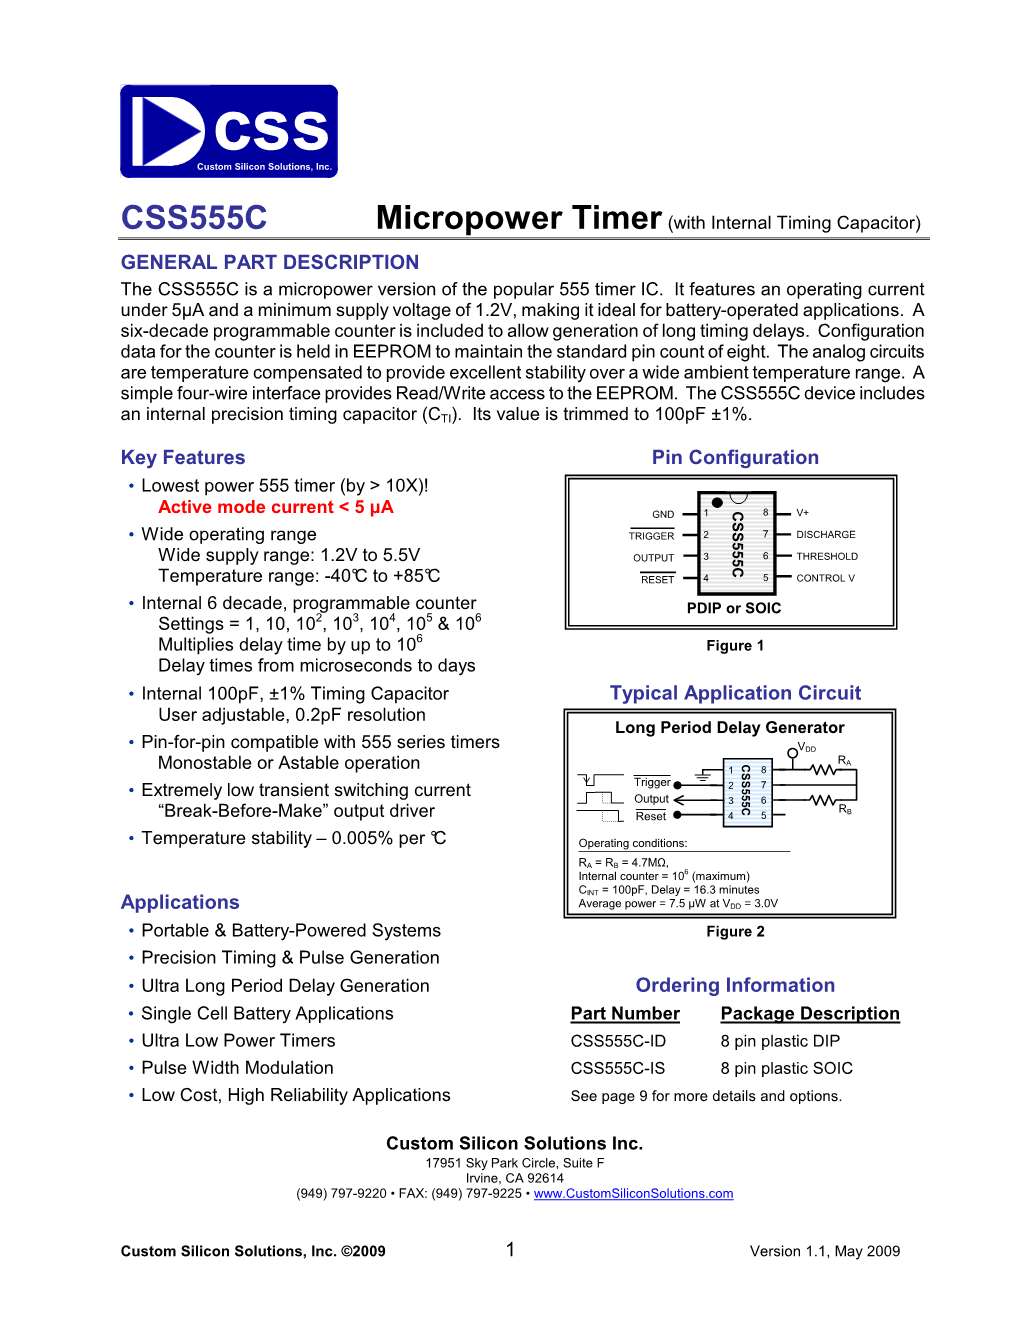 CSS555C Micropower Timer (With Internal Timing Capacitor) GENERAL PART DESCRIPTION the CSS555C Is a Micropower Version of the Popular 555 Timer IC